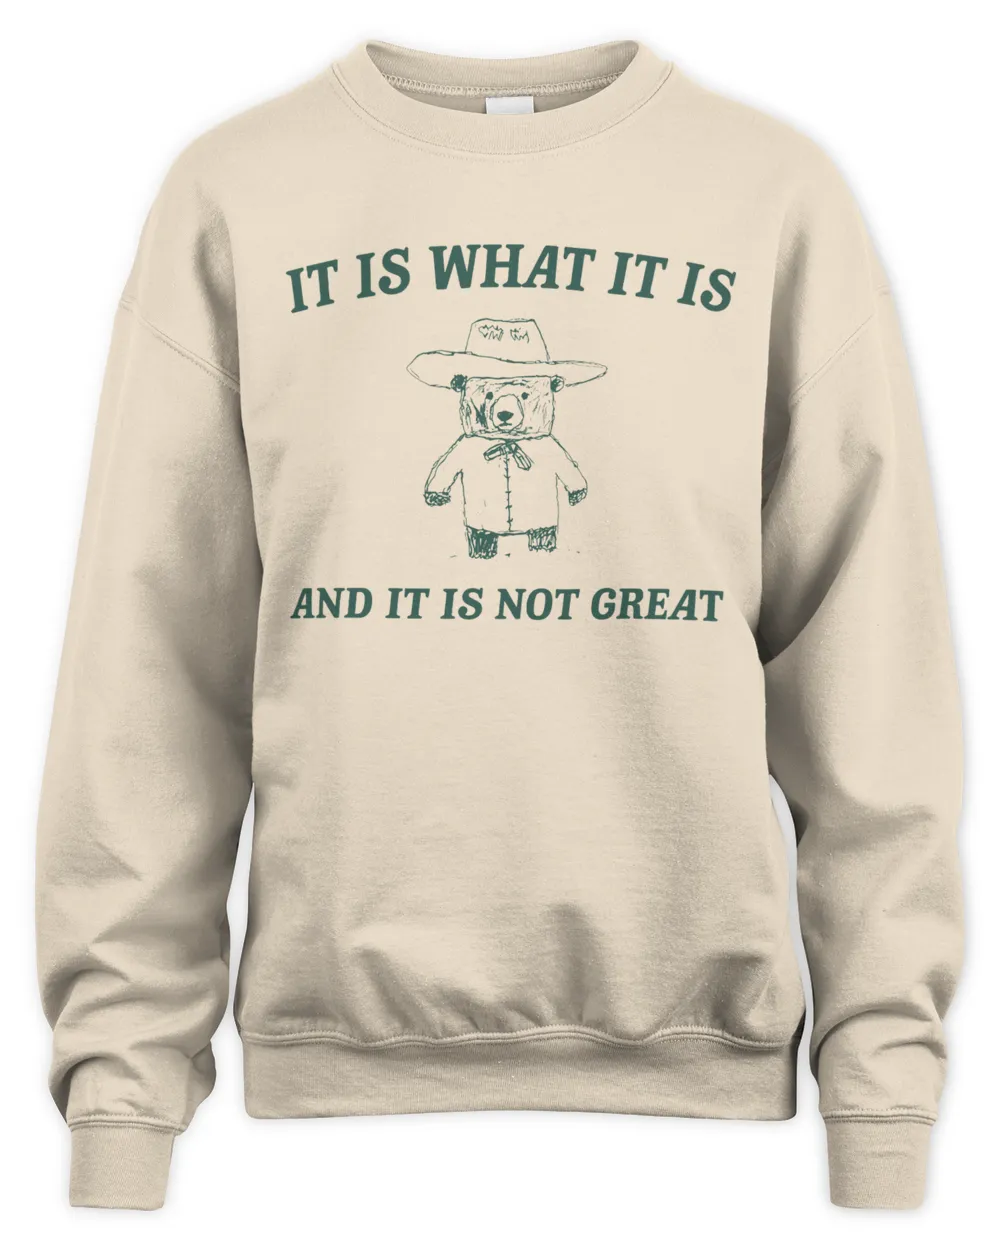 It is what it is and its not great Unisex Heavy Sweatshirt